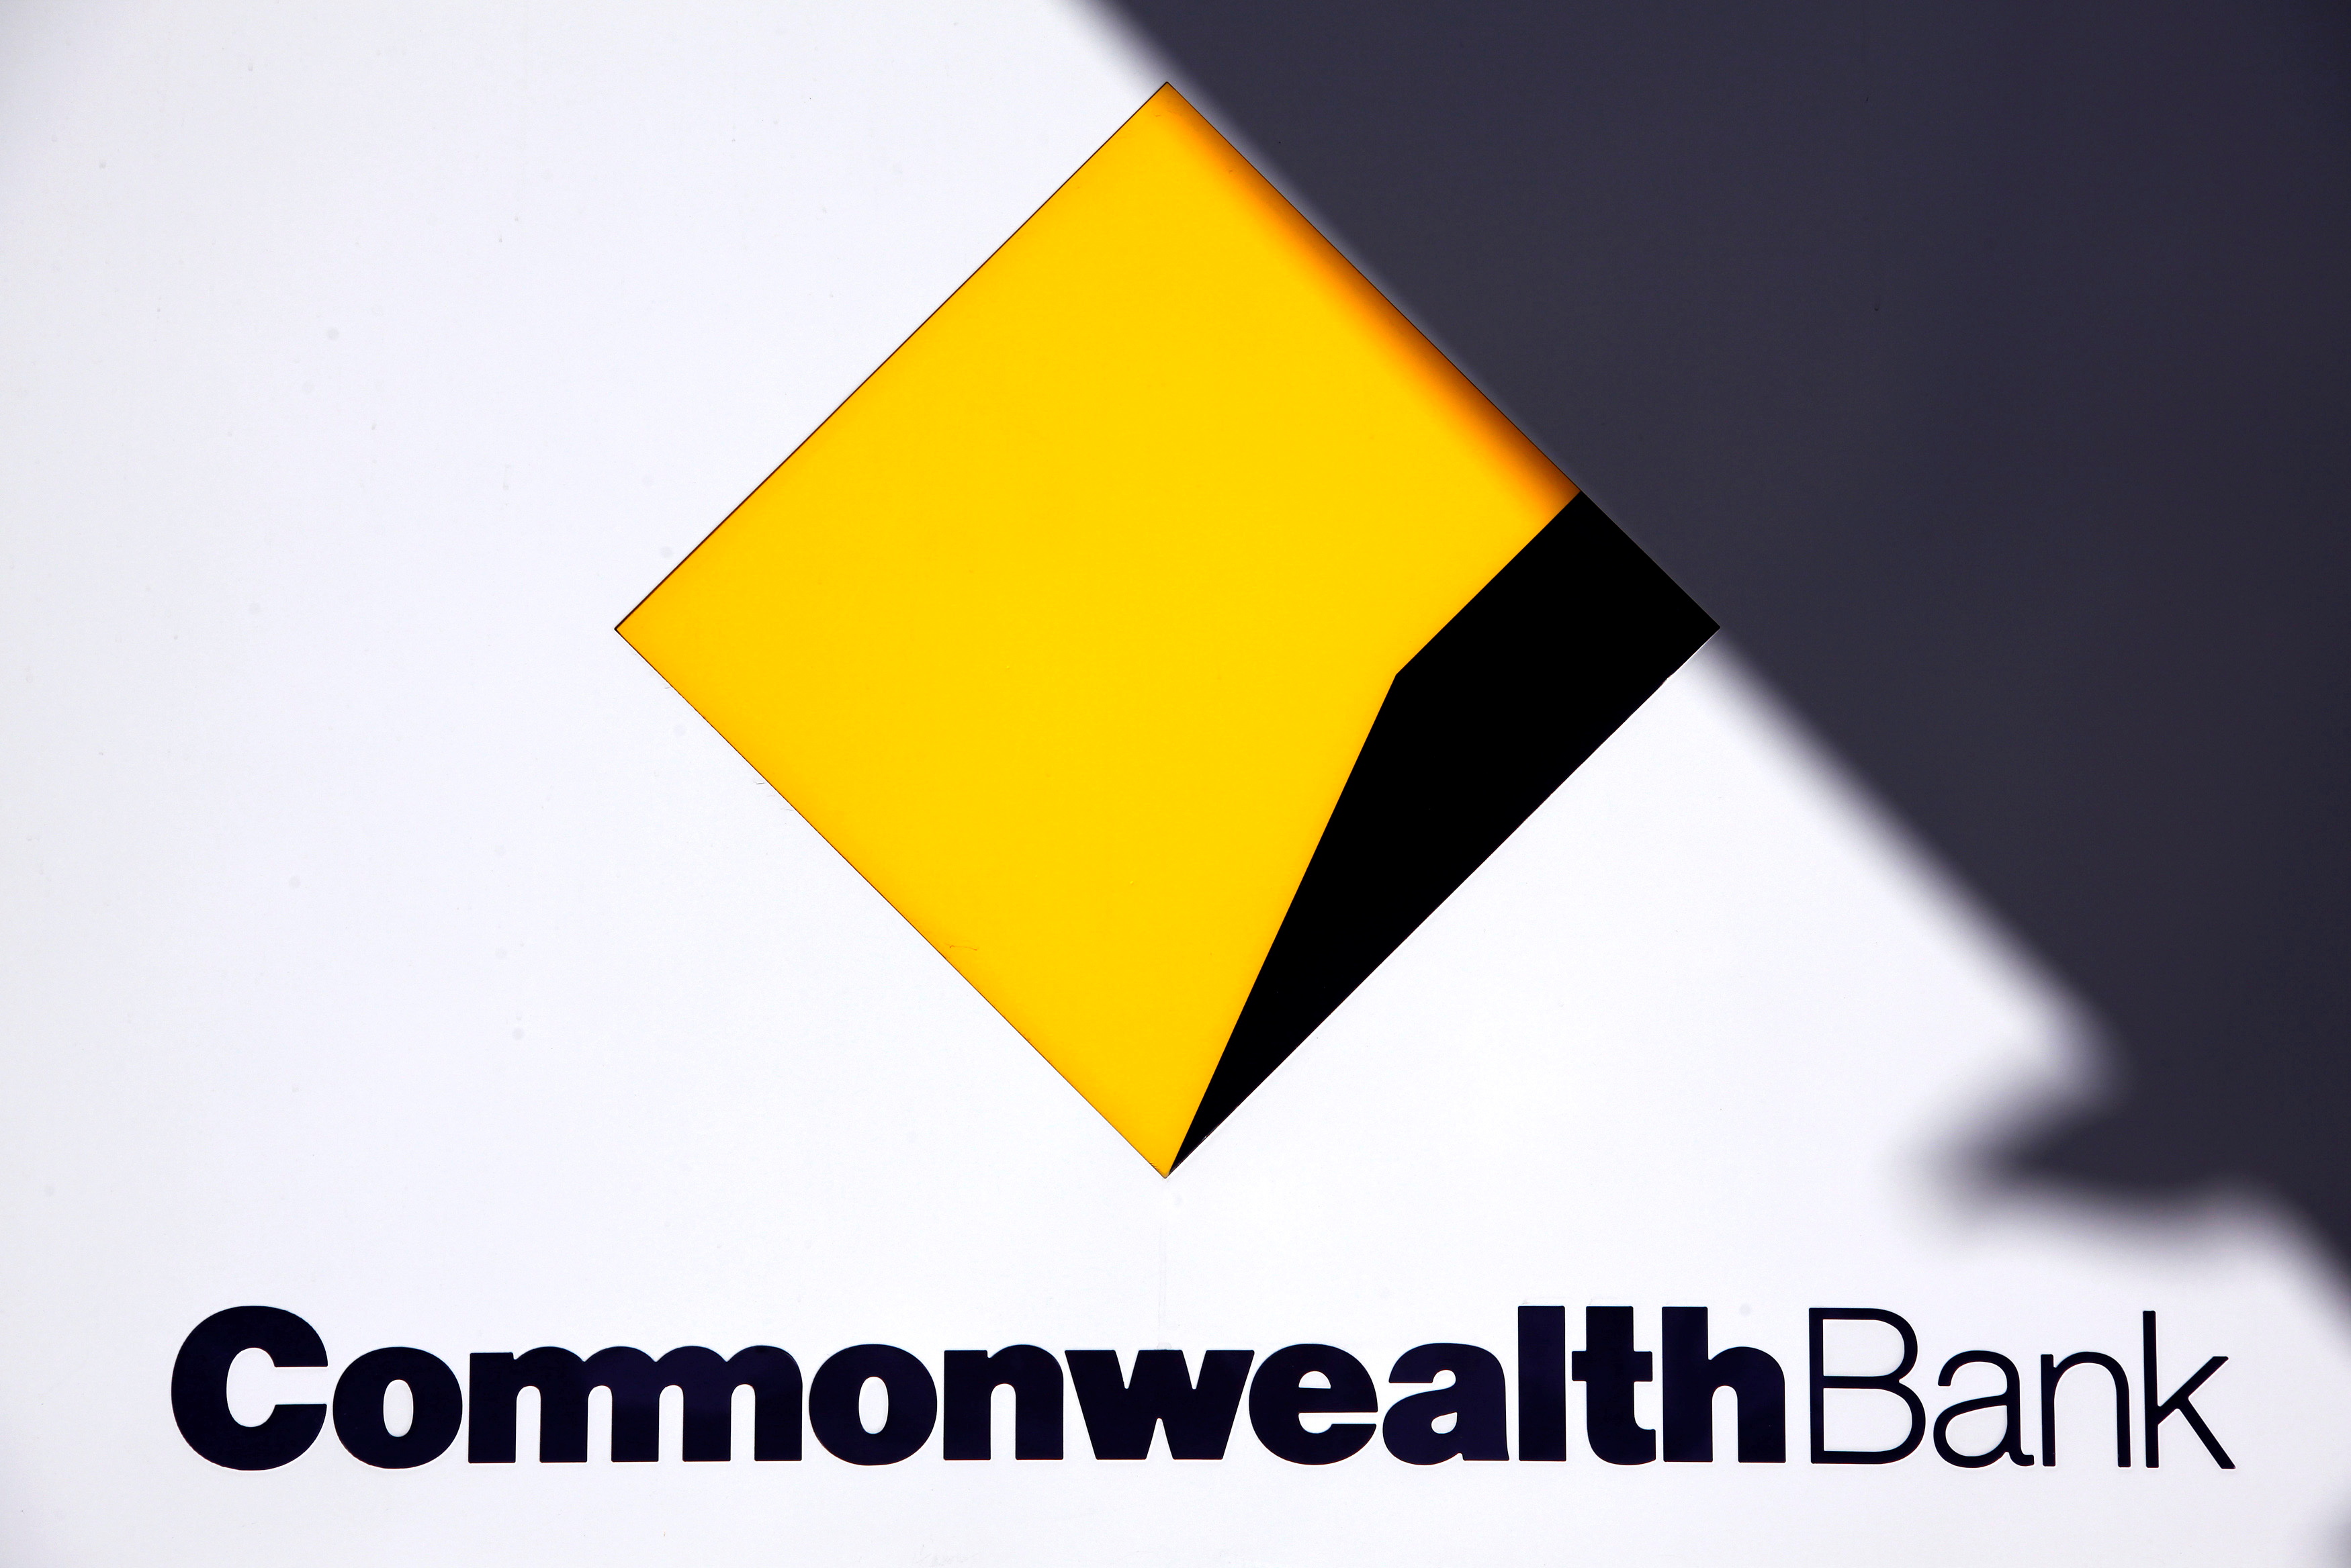 Australia's Commonwealth Bank logo is pictured at a branch in Sydney